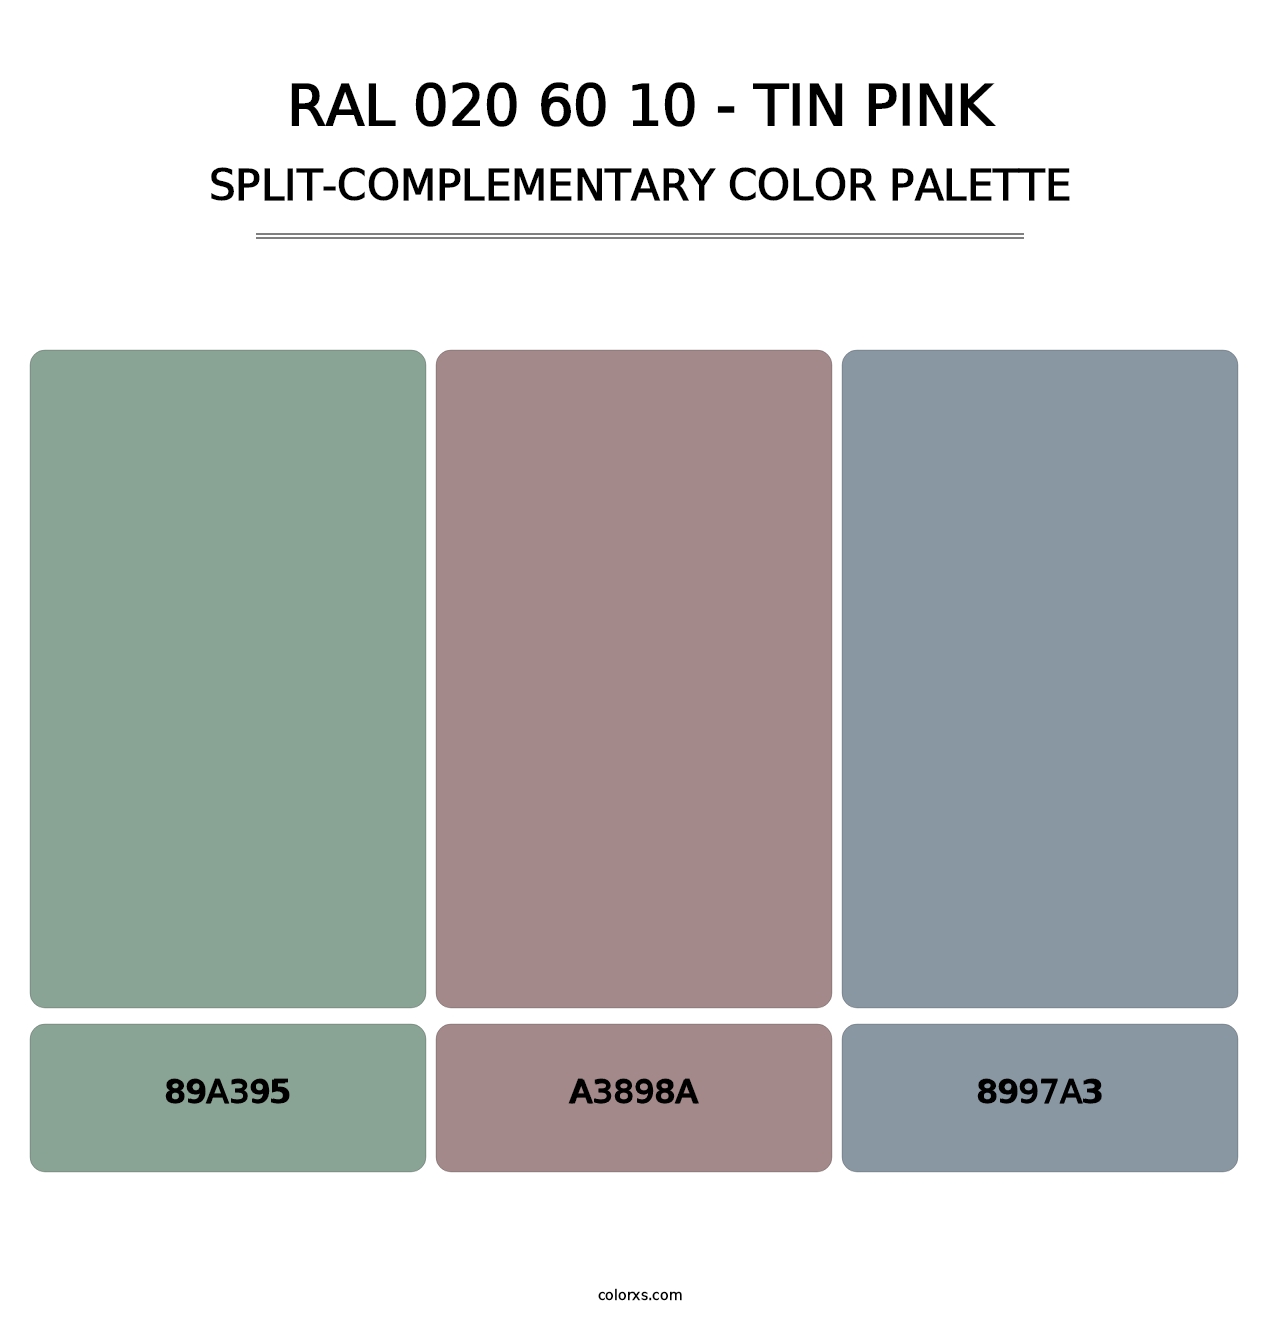 RAL 020 60 10 - Tin Pink - Split-Complementary Color Palette